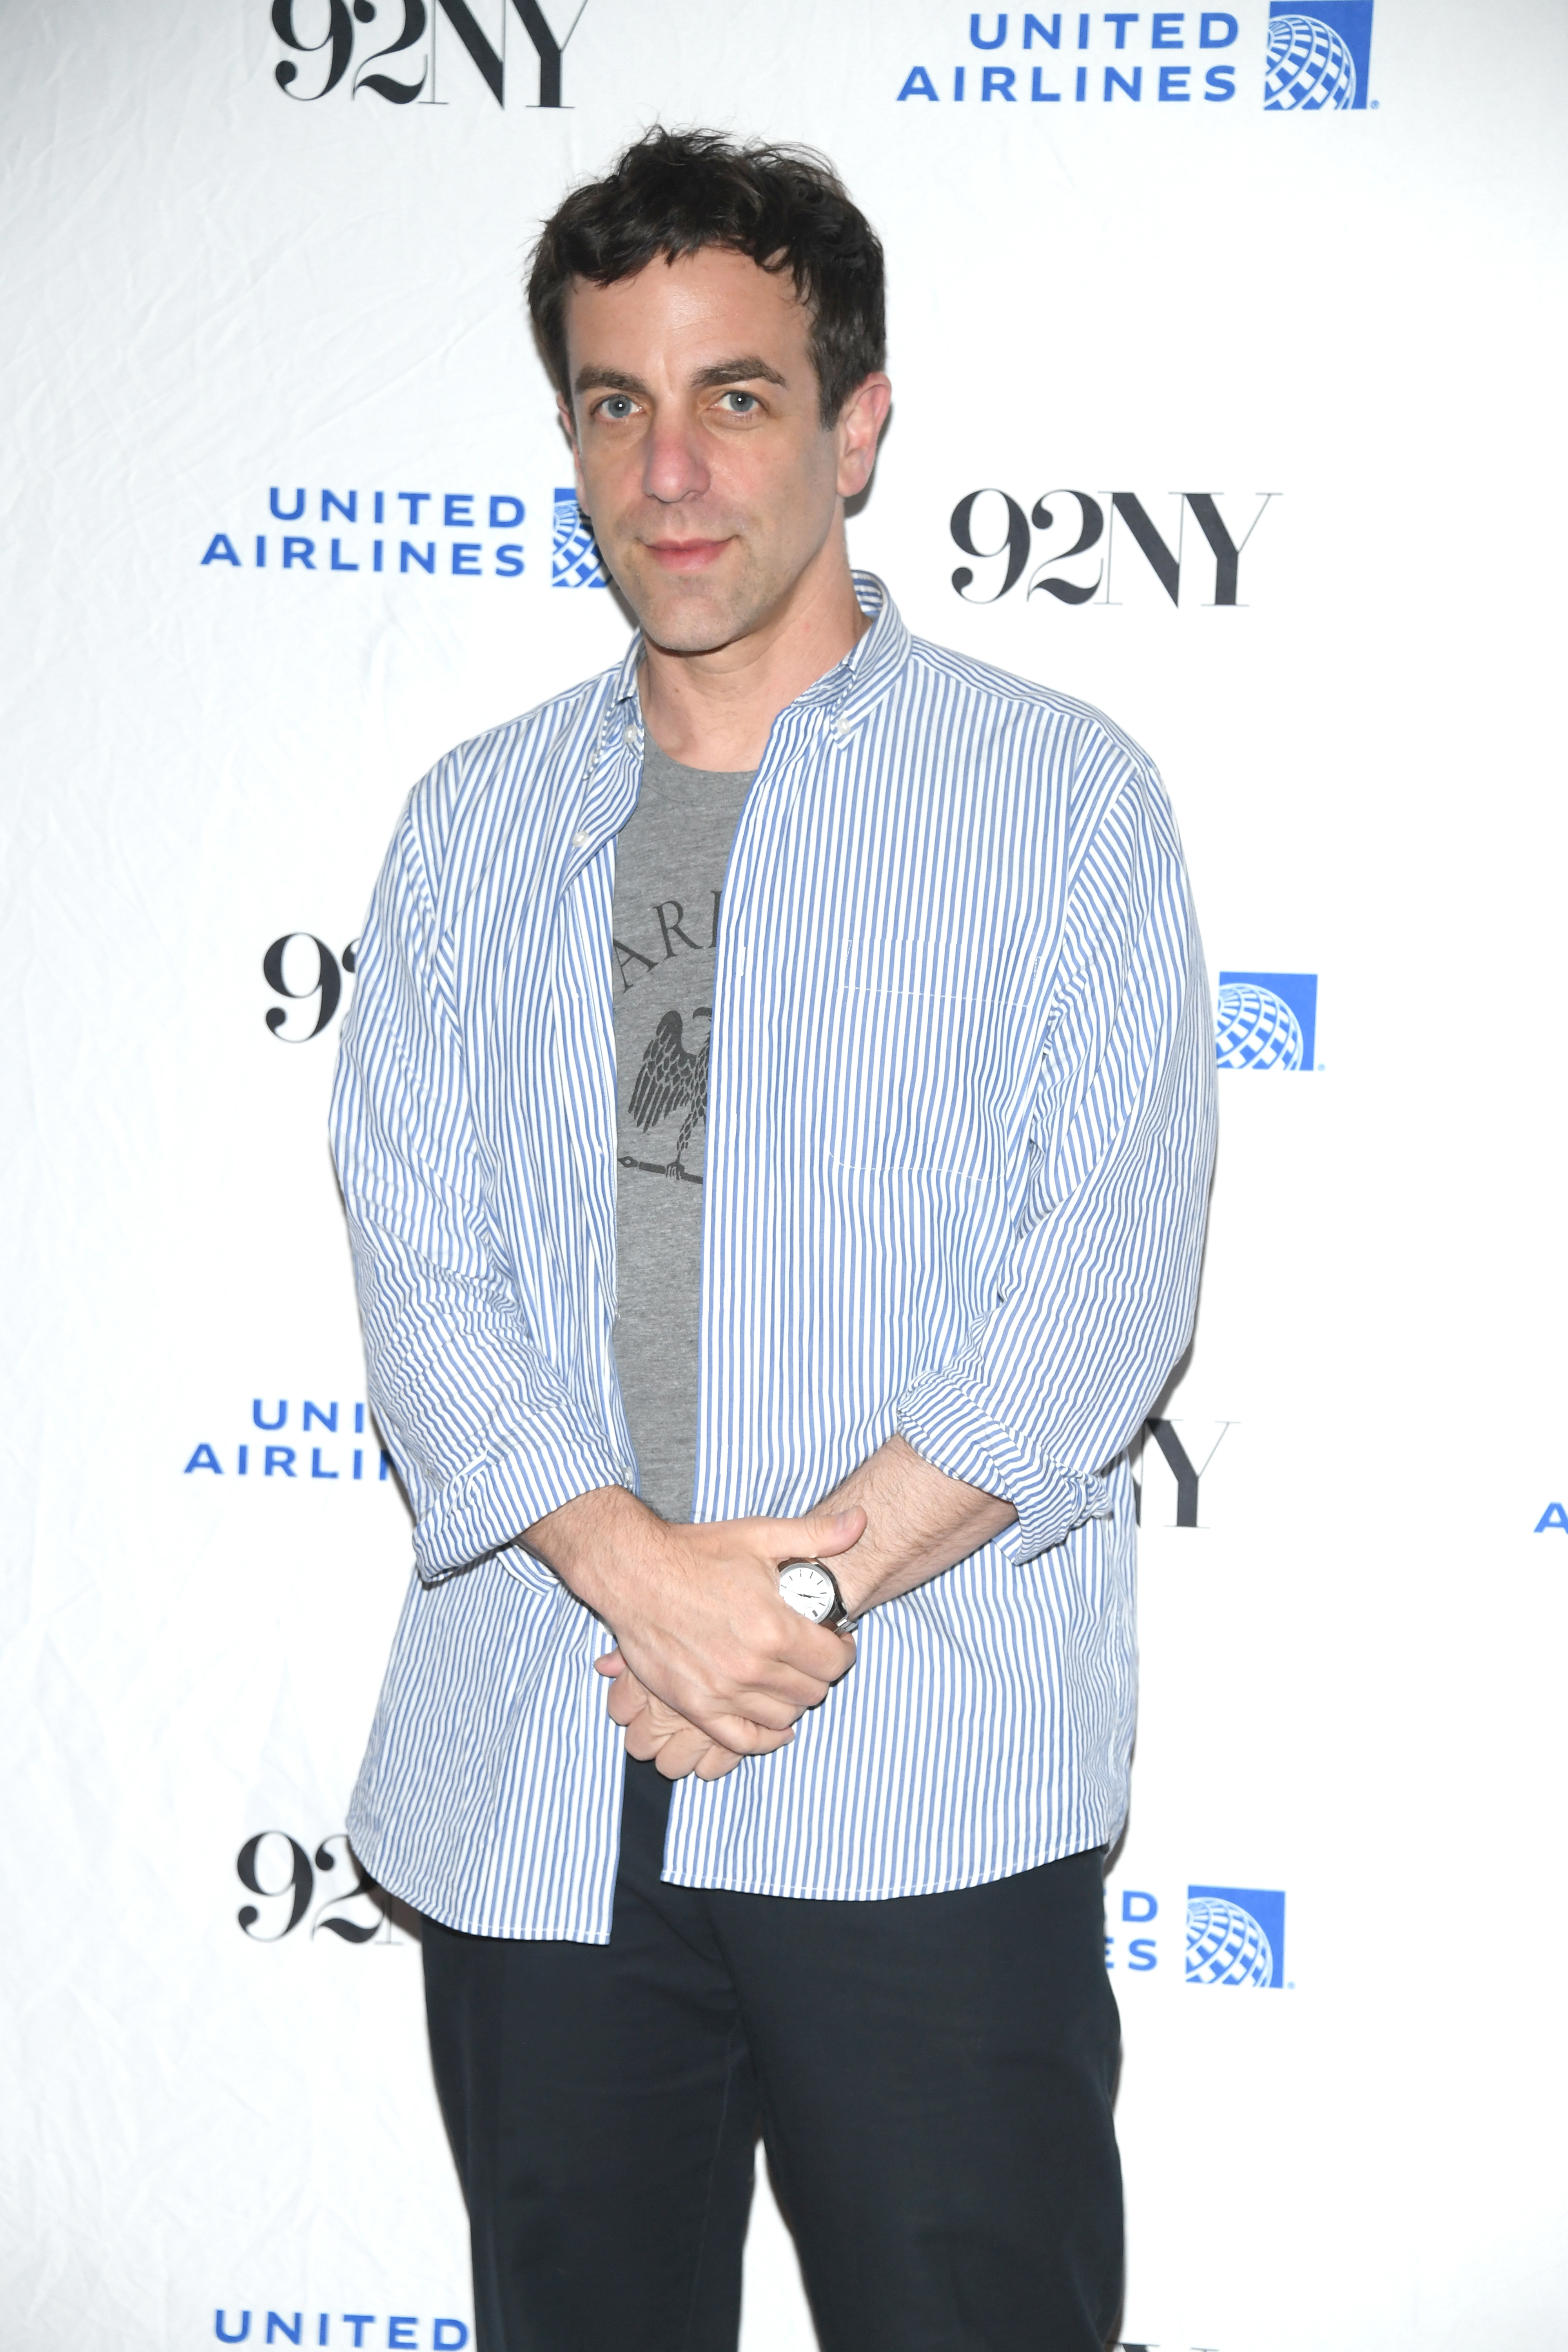 B.J. Novak stands in front of a backdrop with logos for United Airlines and 92NY, wearing a striped shirt over a graphic T-shirt